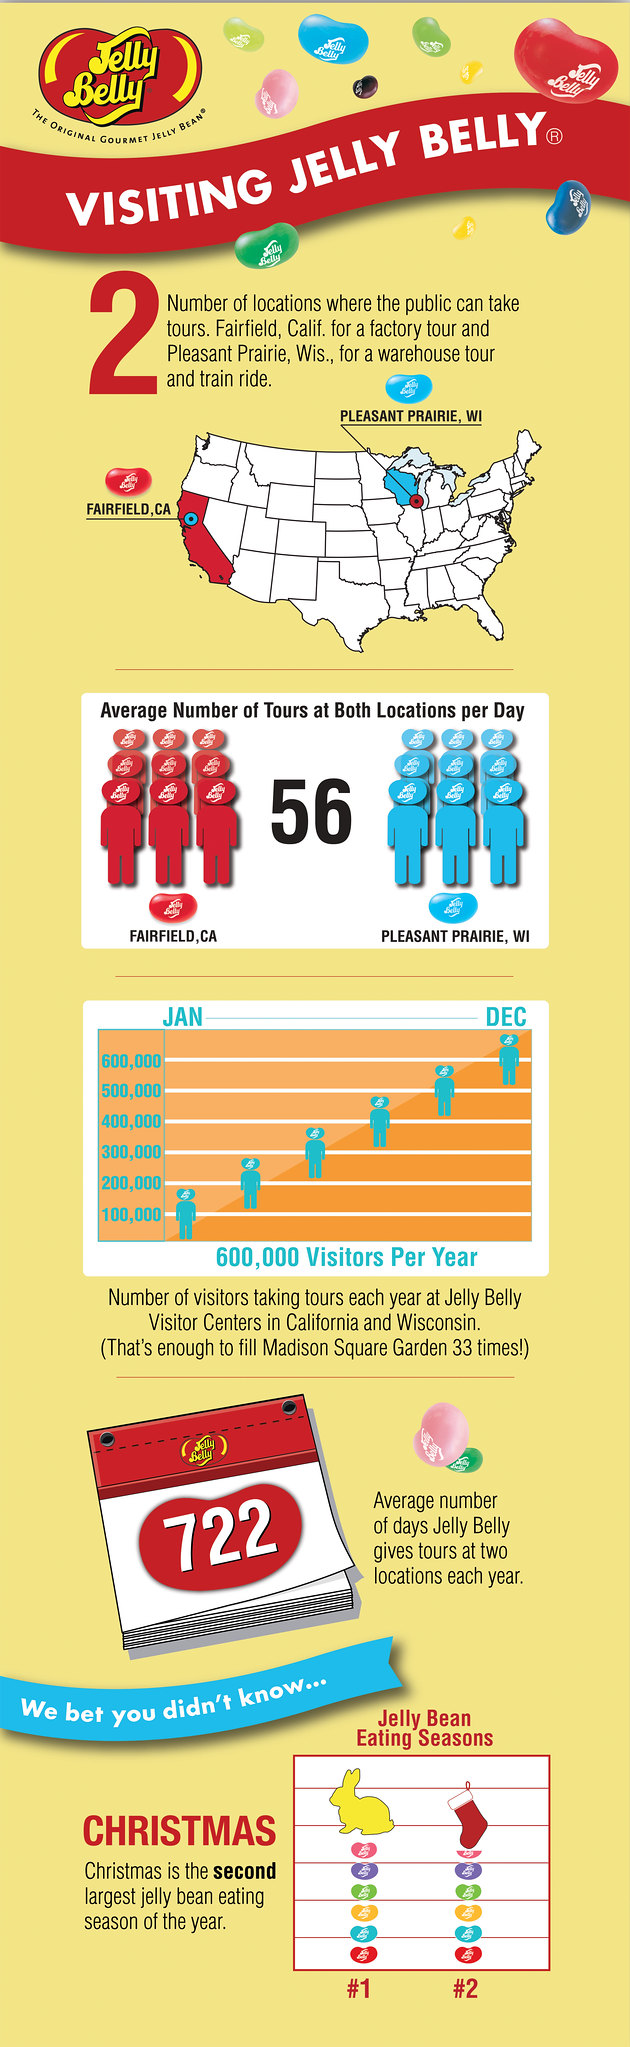 Visiting Jelly Belly INFOGRAPHIC